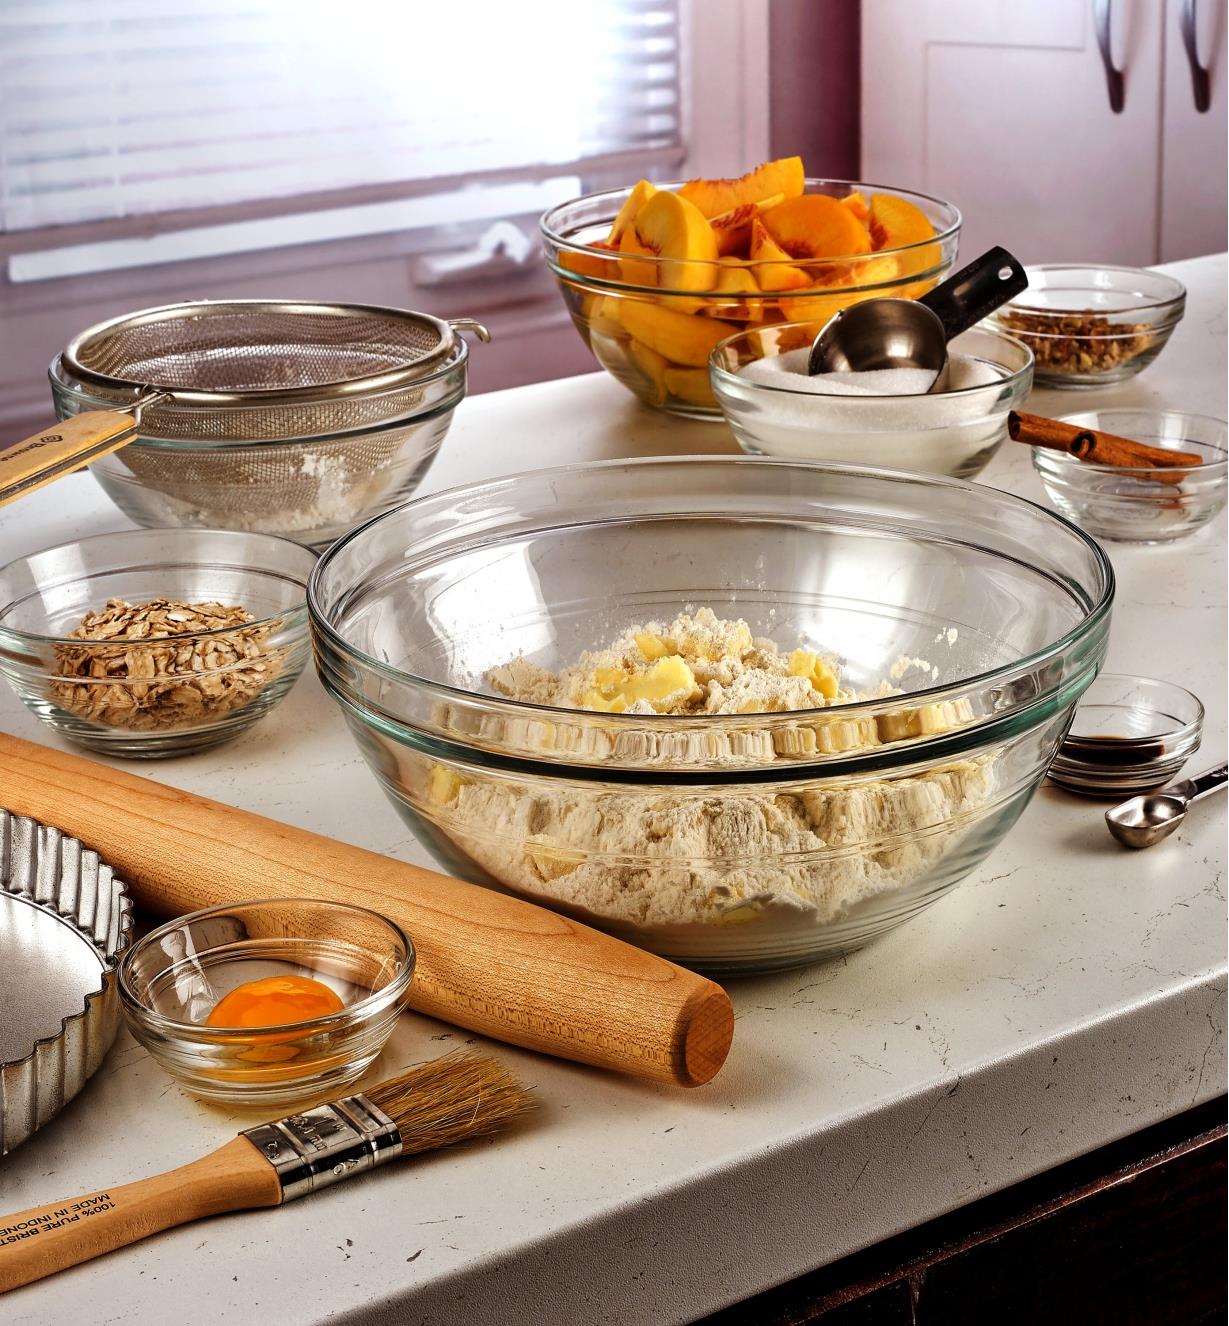 Various sizes of Duralex glass bowls being used to contain and mix ingredients to make a peach pie